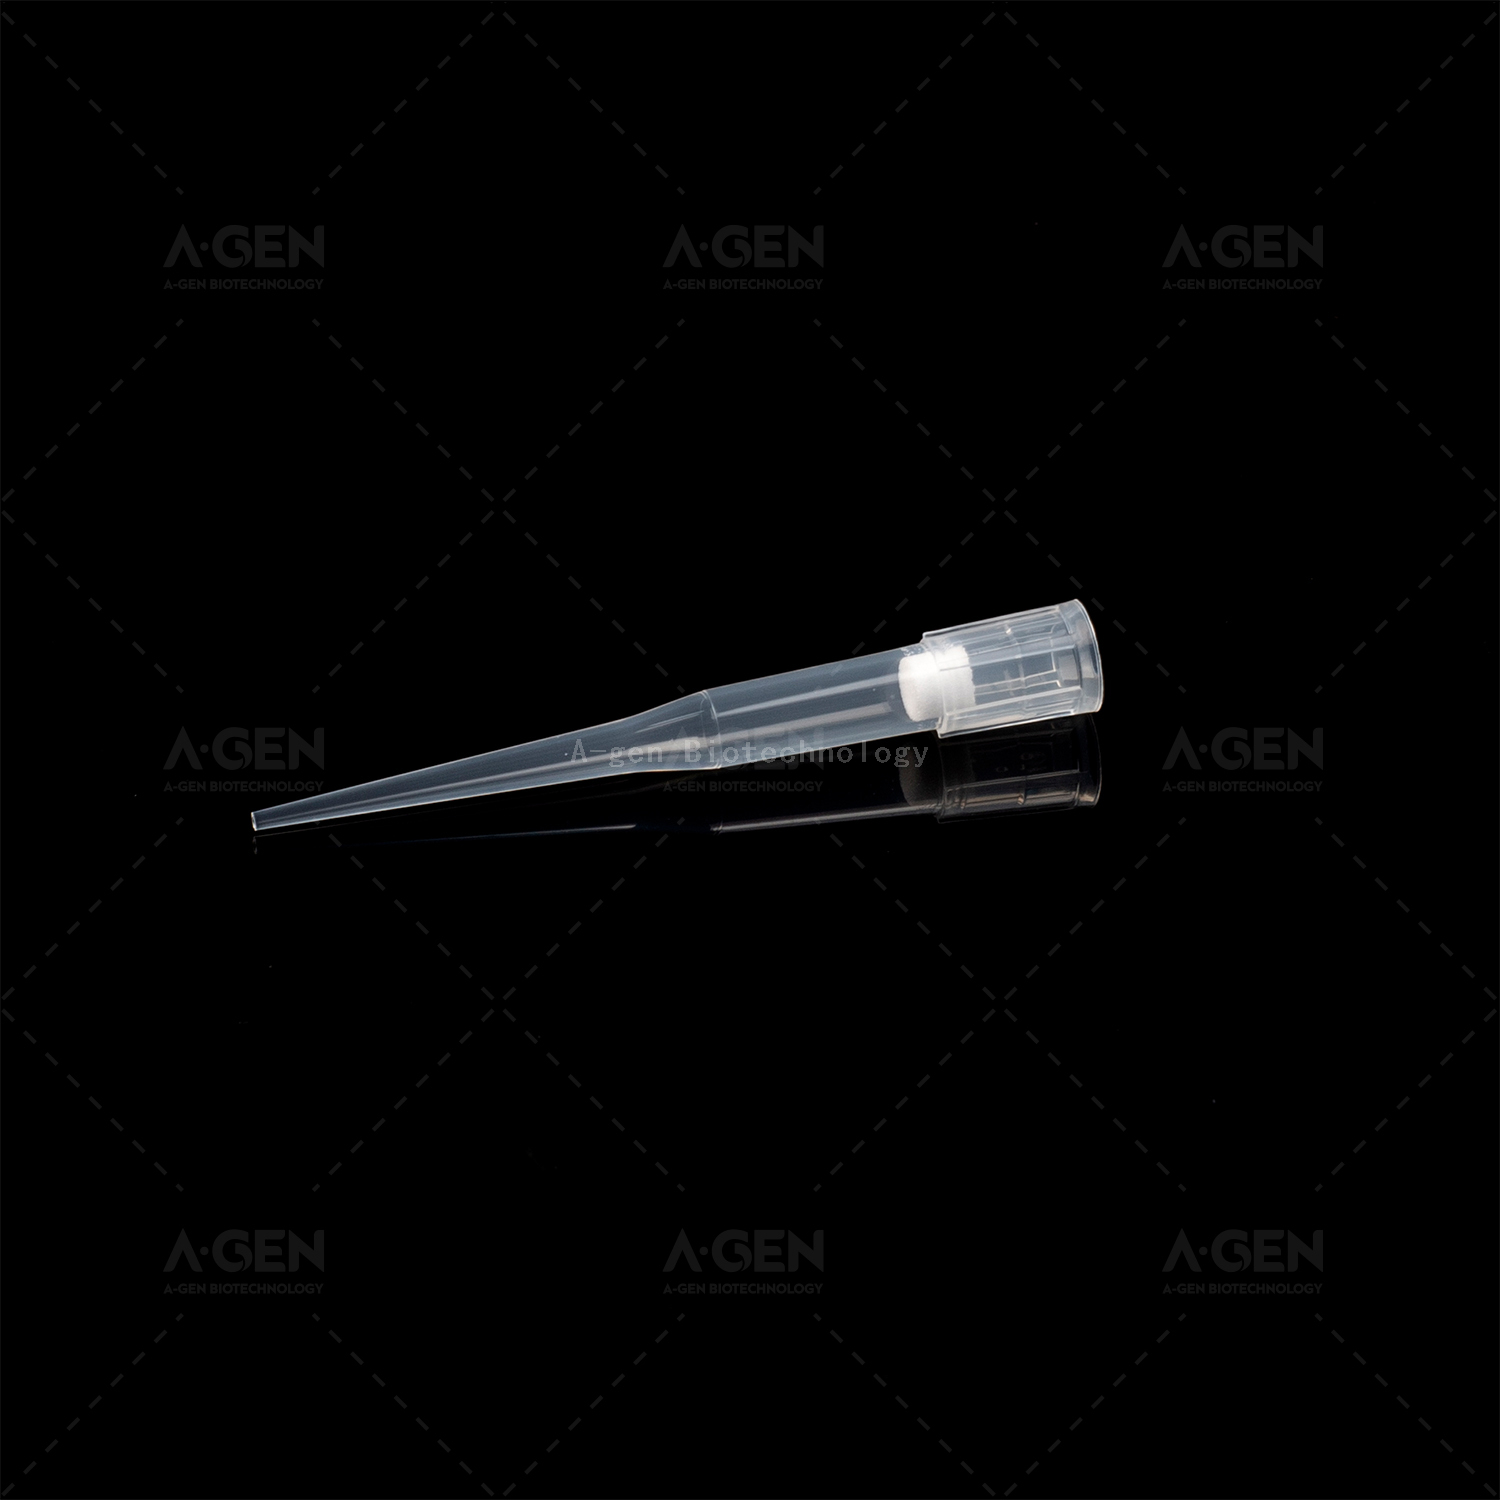 BECKMAN 250μL Clear Robotic PP Pipette Tip with Filter (Racked,sterilized) for Liquid Handling FXF-250-RS